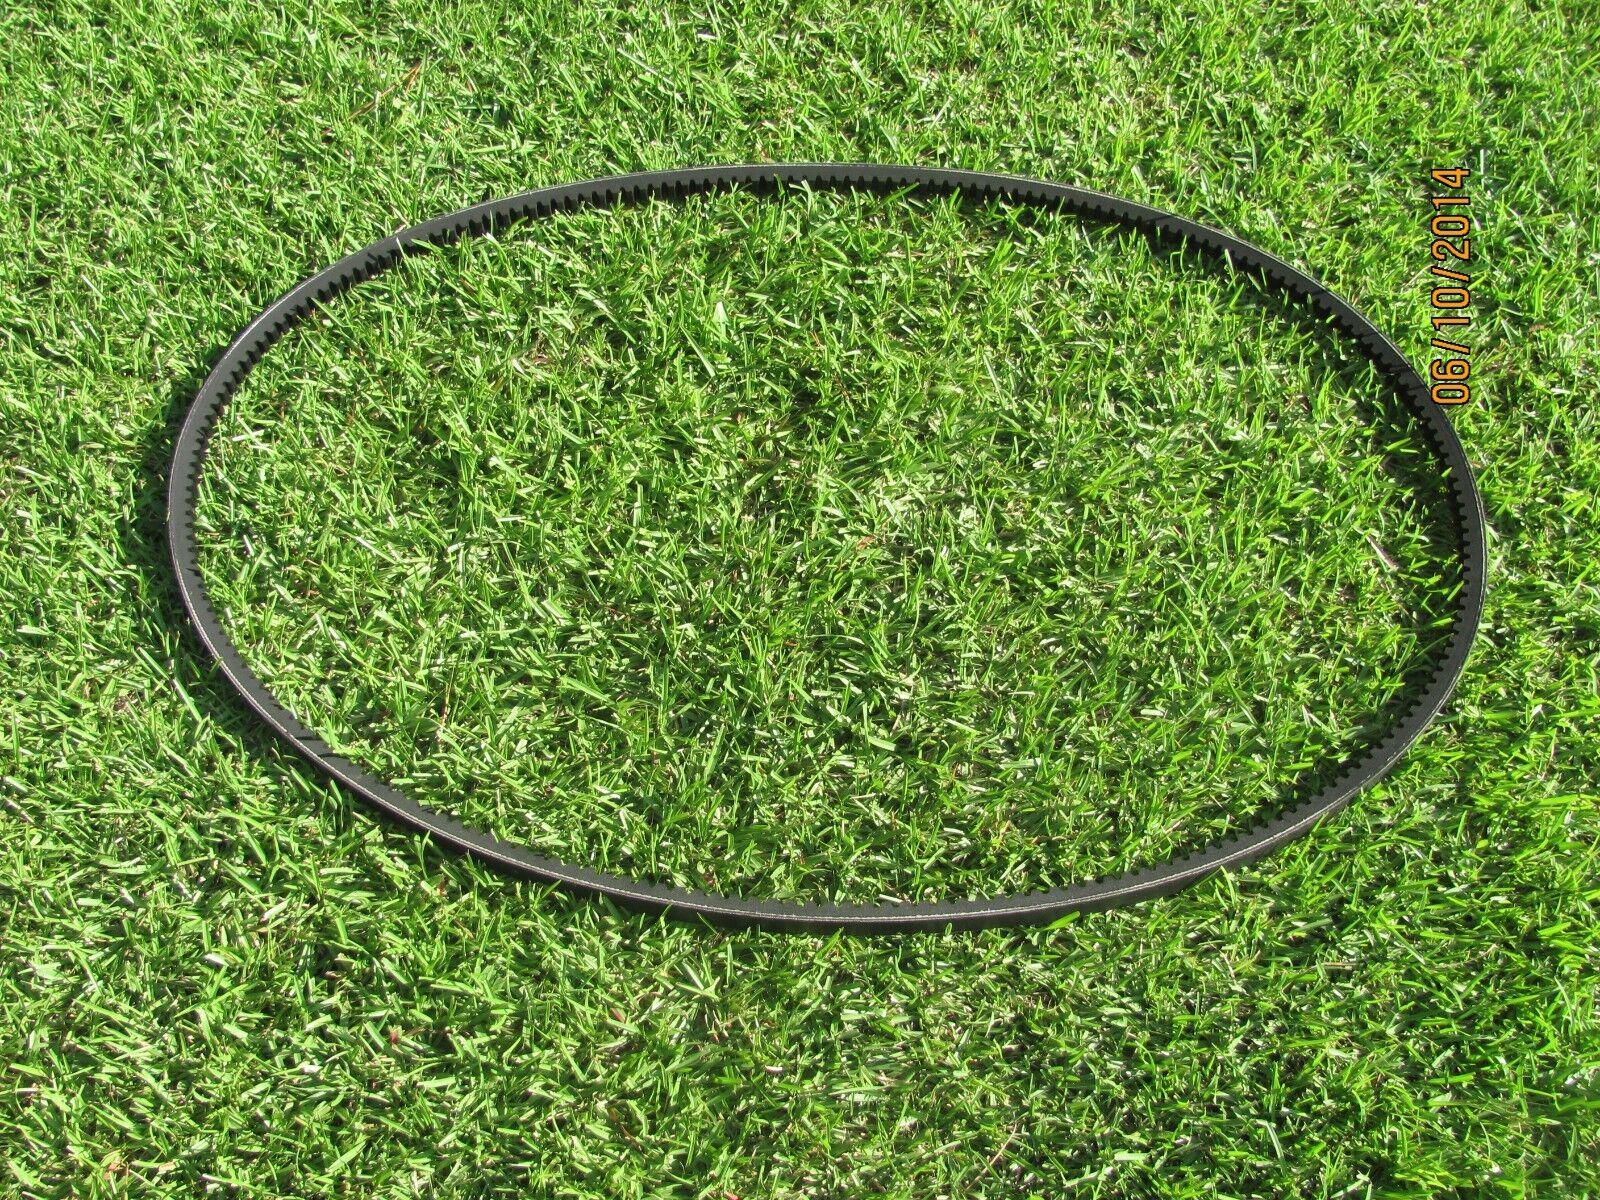 1 REPLACEMENT COGGED BELT FOR BEFCO C30-RD5 & C15-BEFCO 000-8670- FITS 5' MOWERS